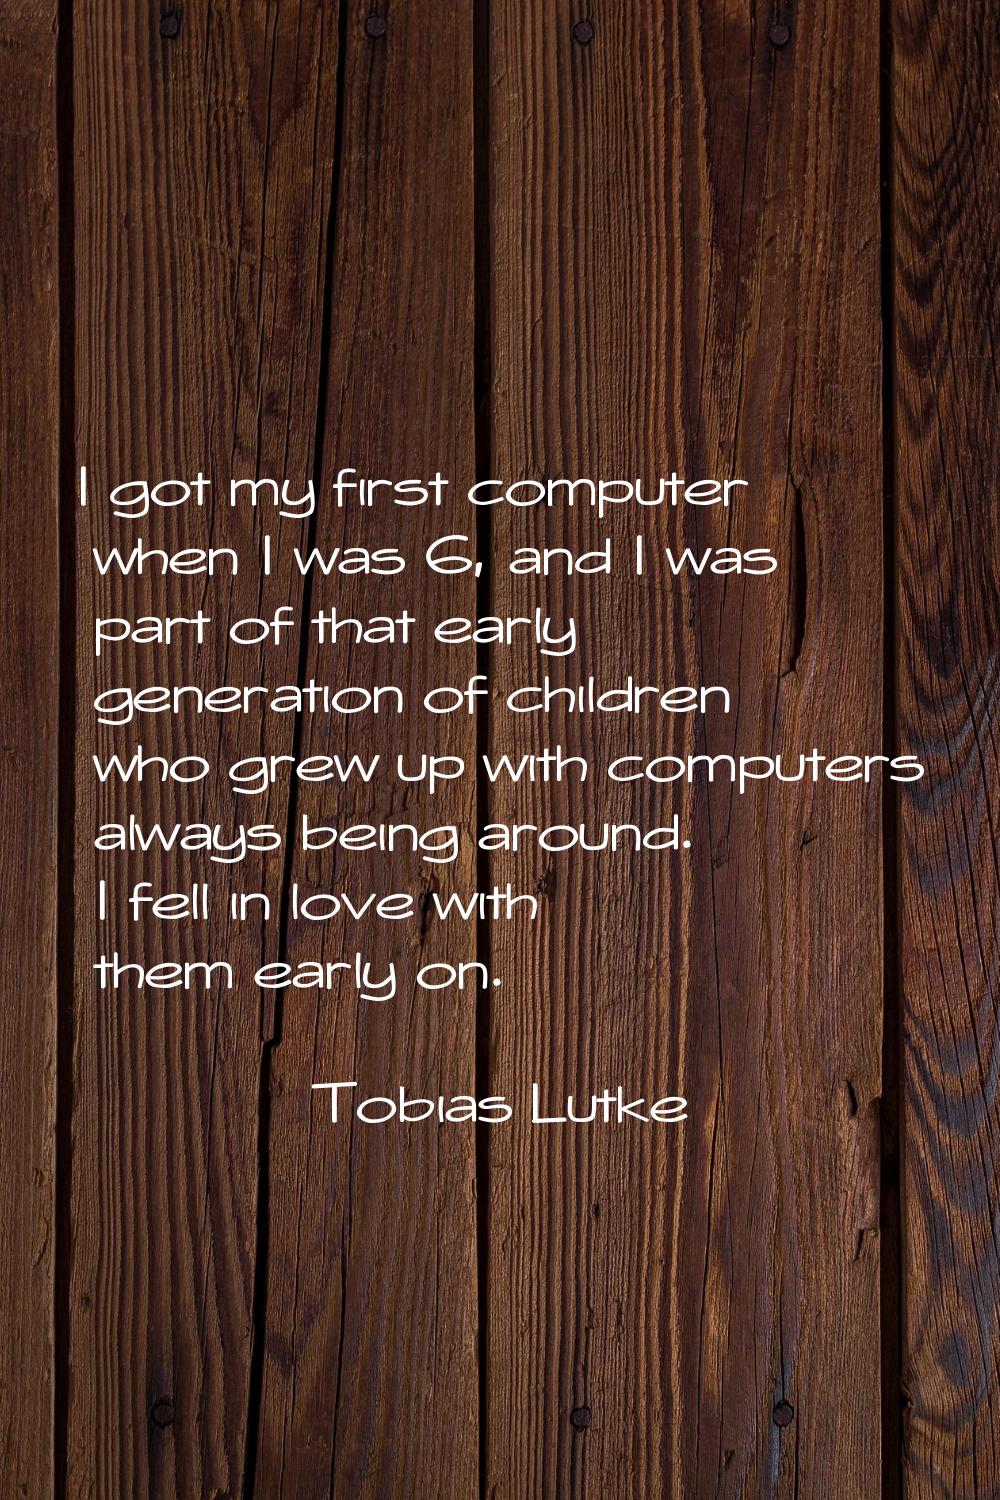 I got my first computer when I was 6, and I was part of that early generation of children who grew 